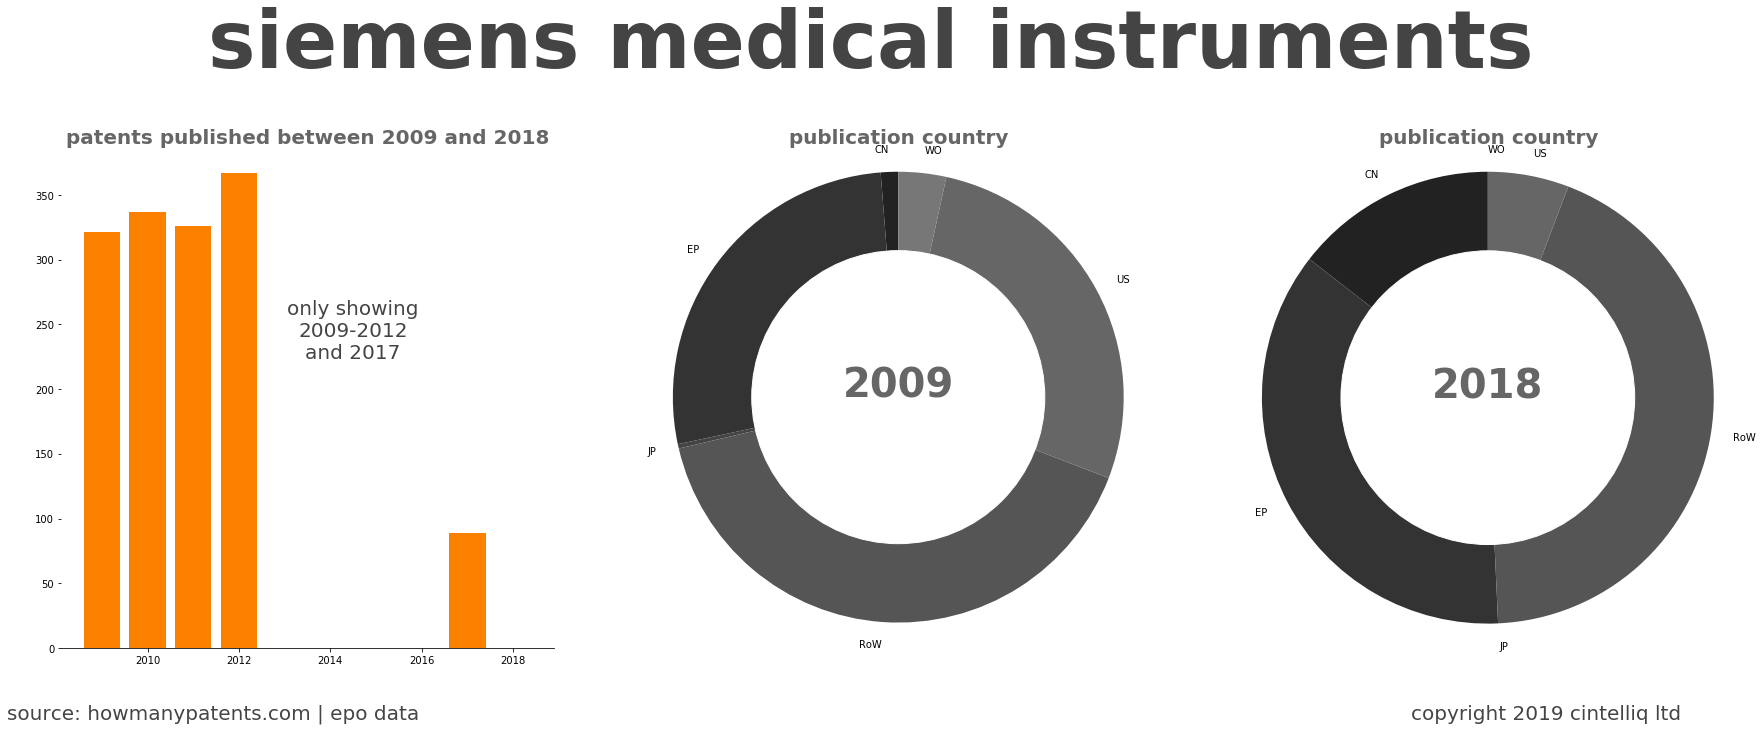 summary of patents for Siemens Medical Instruments